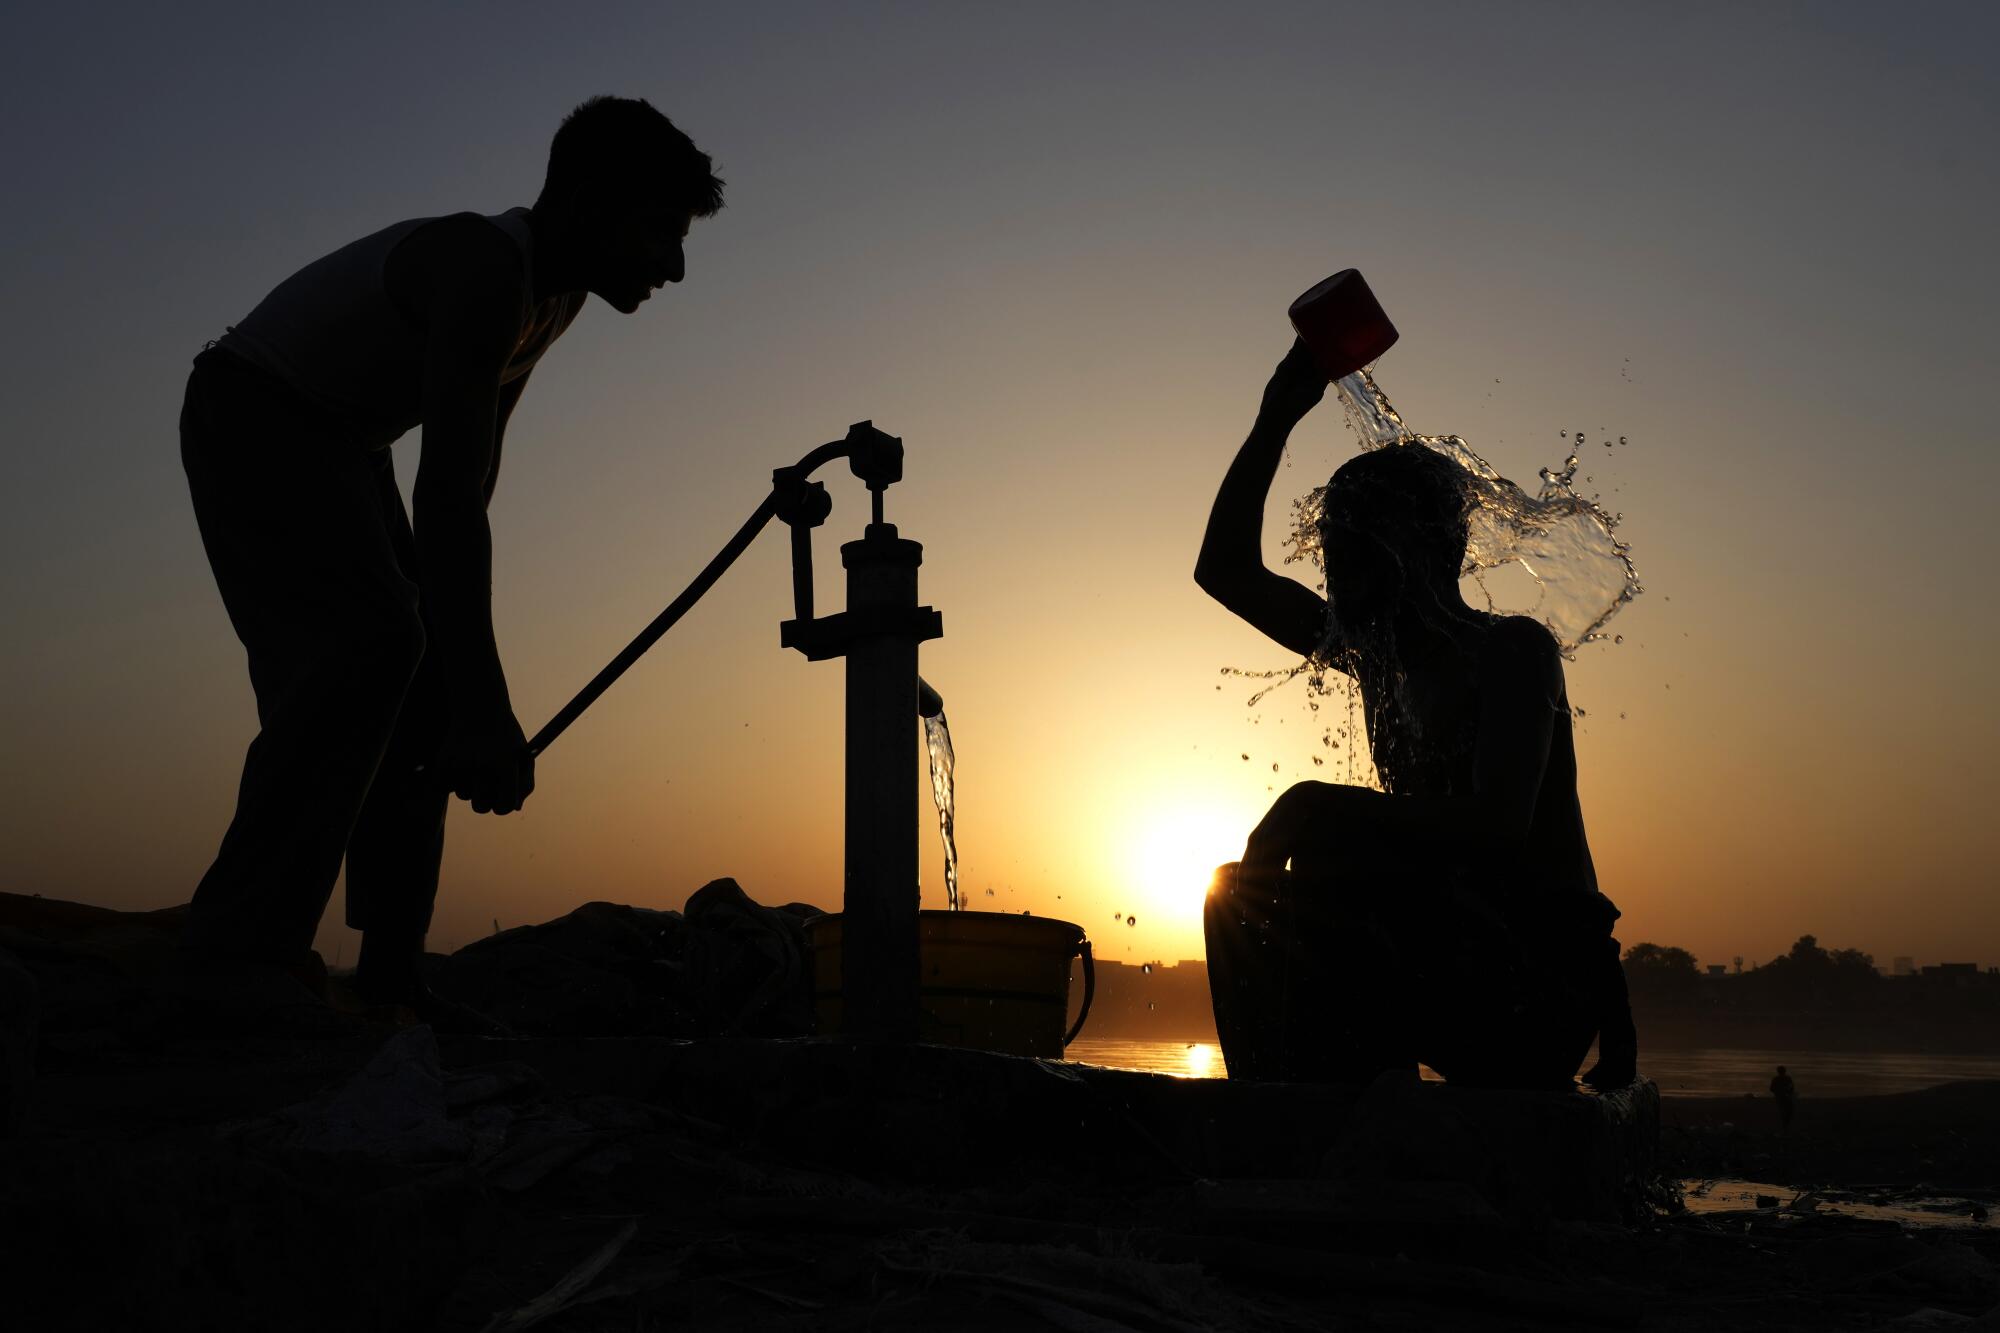 The setting sun silhouettes two figures at a water pump as one of them ours a container of water over their head.